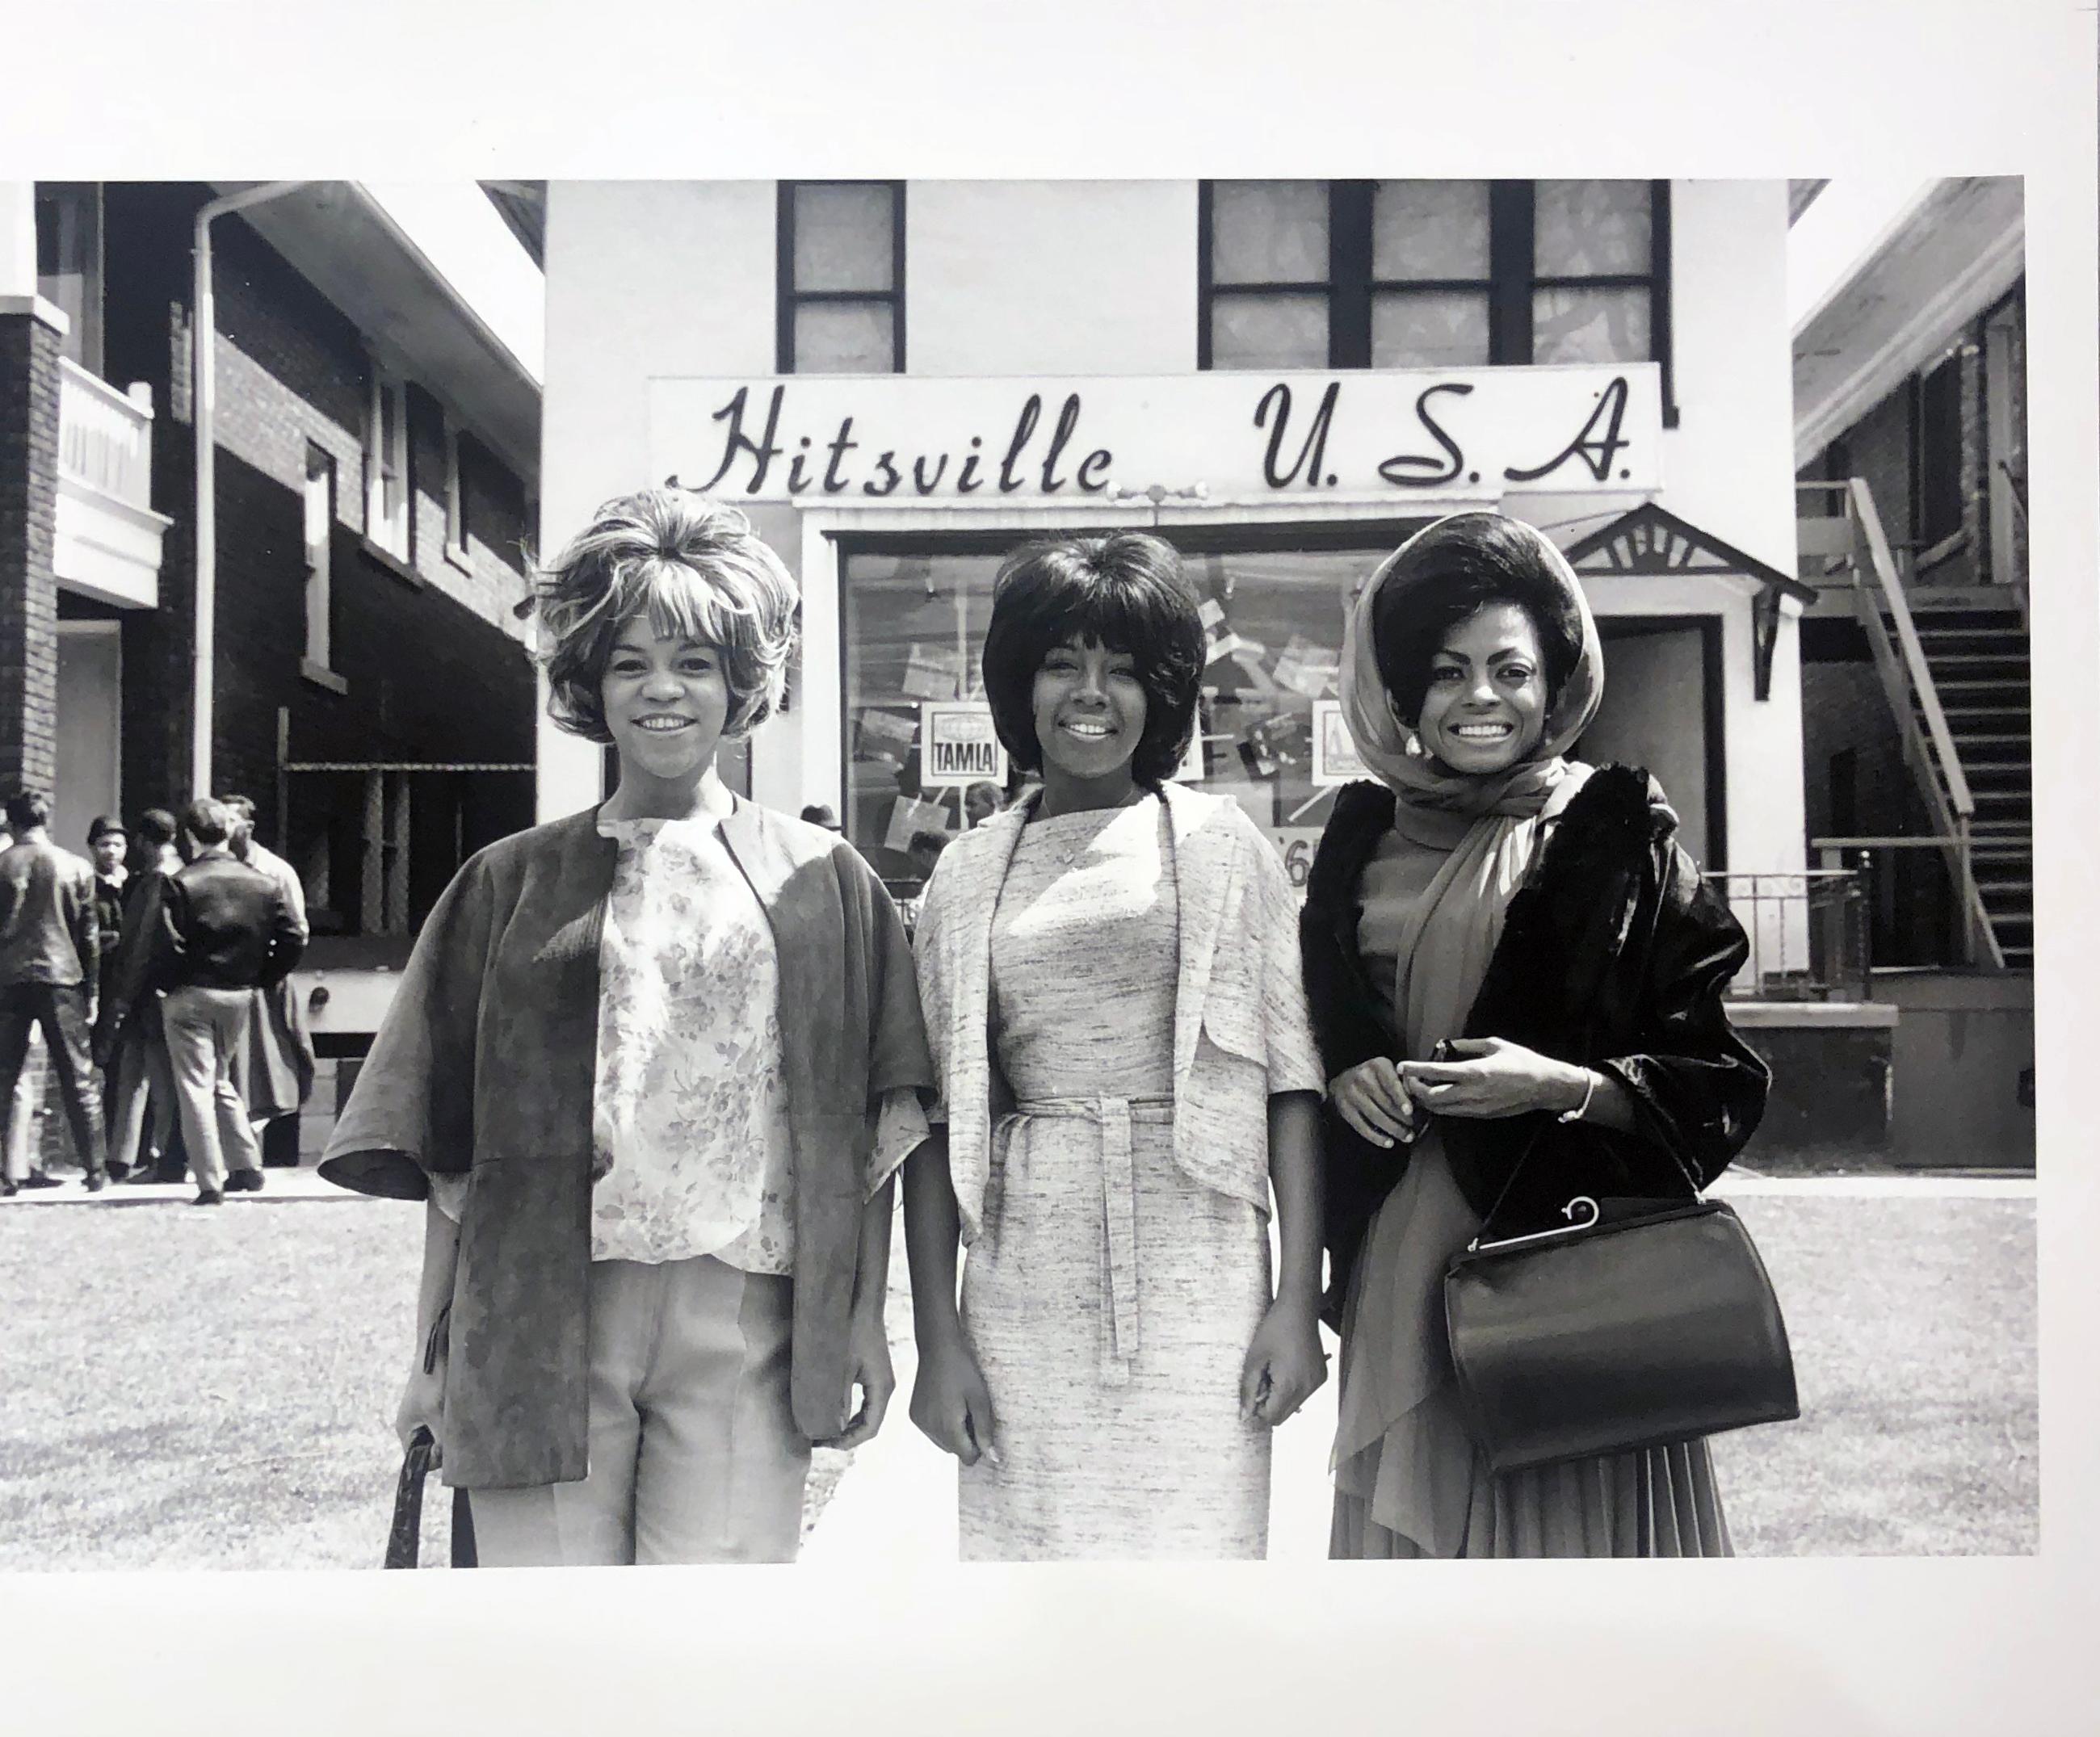 The excitement and innocence is profoundly evident on the faces of Dianna Ross, Mary Wilson and Florence Ballard - AKA The Supremes, in this exemplary photograph taken at the Hitsville Studio, Detroit, Michigan.  The photo is signed by Art Shay on